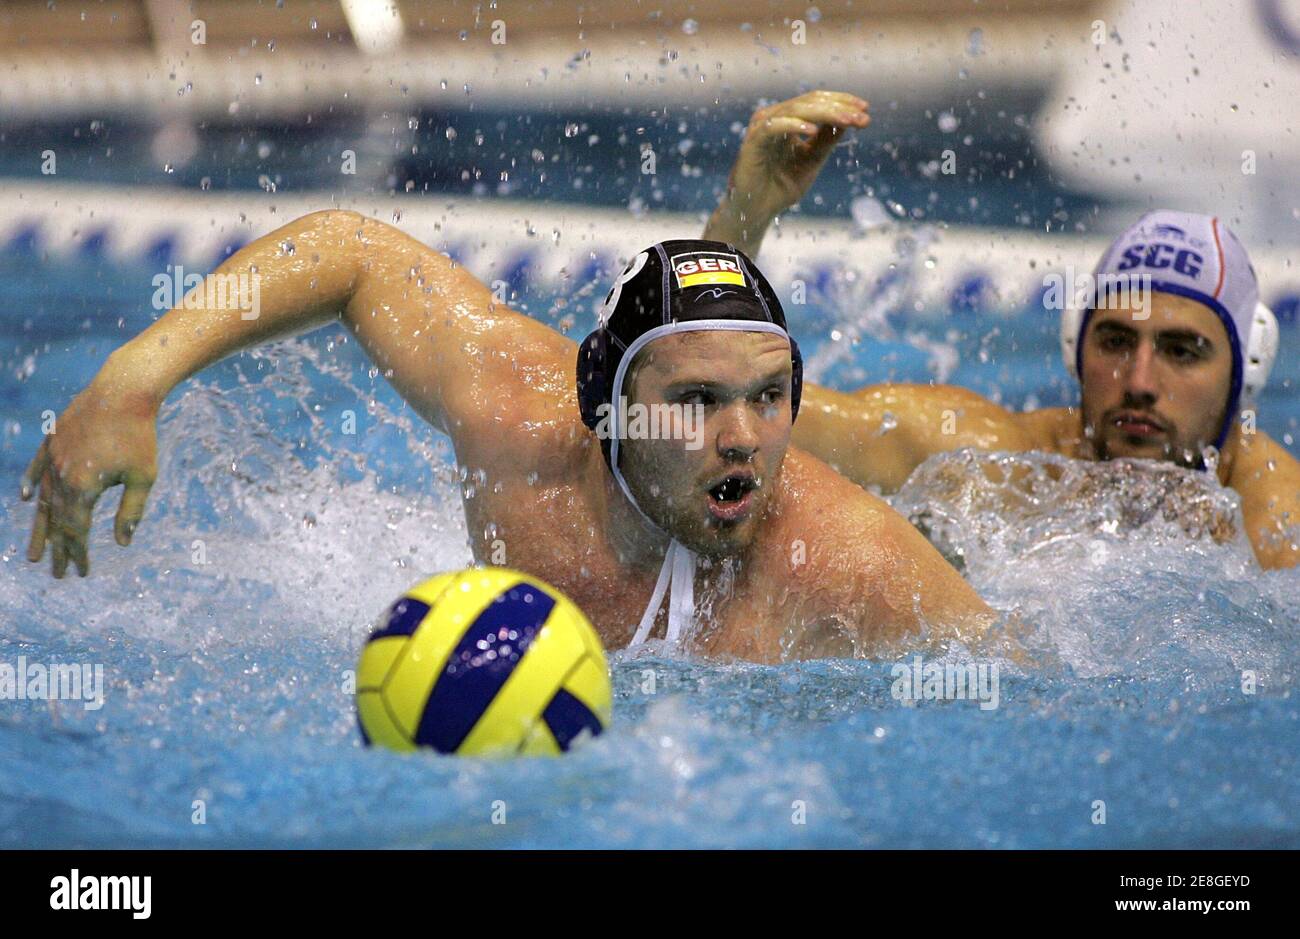 Heiko Nossek (L) of Germany struggles for the ball with Nikola Radjen of Serbia & Montenegro during their friendly water polo match as part of preparations for the upcoming European Waterpolo Championships in Belgrade March 8, 2006. REUTERS/Ivan Milutinovic Stock Photo